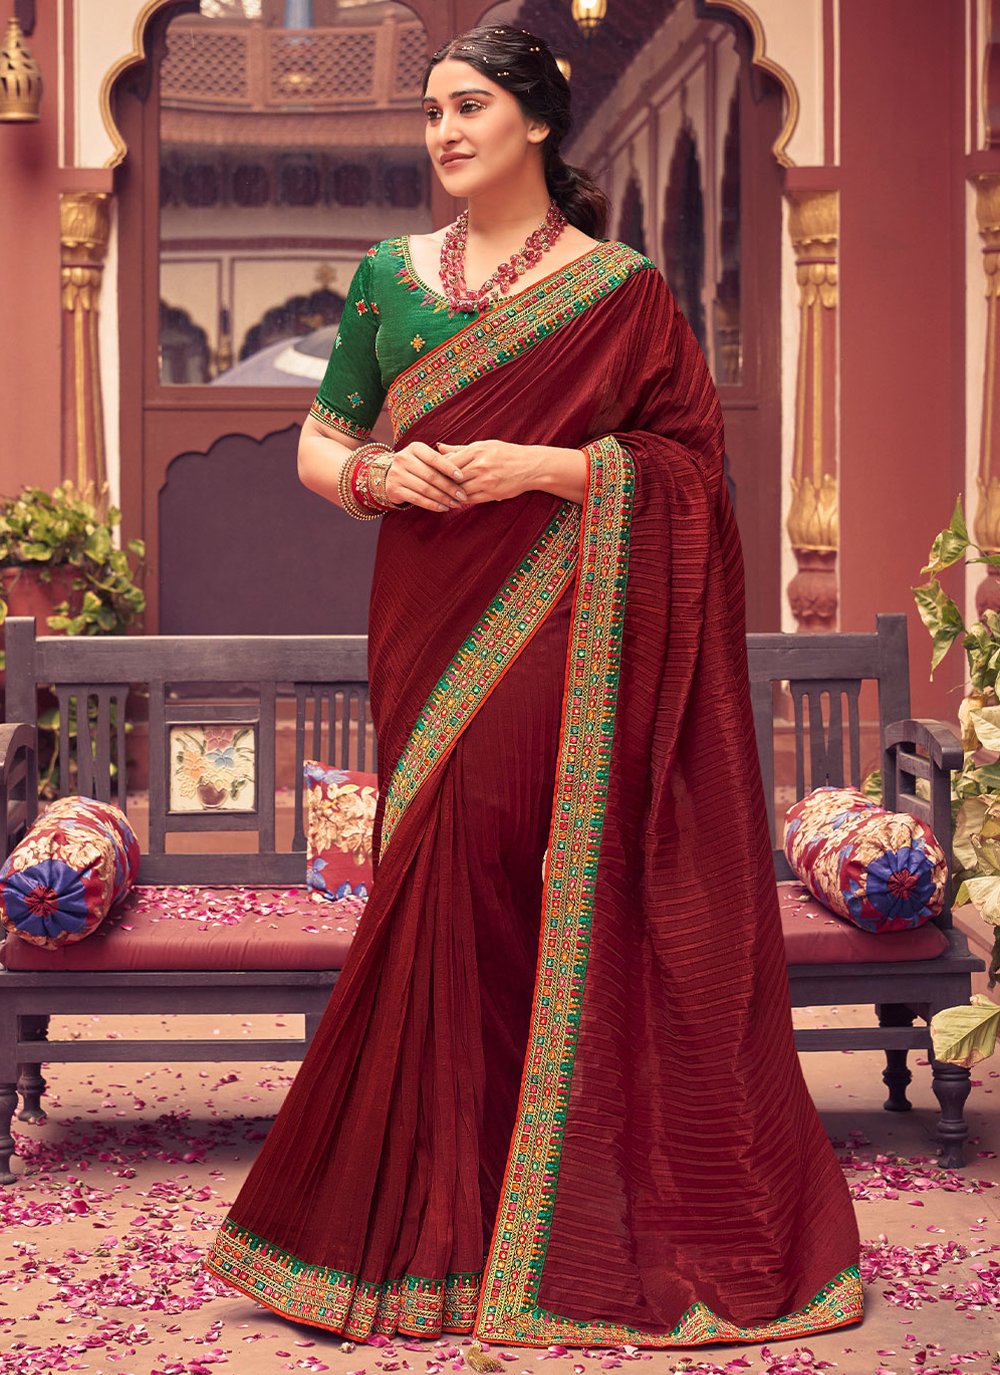 Photo of South Indian bride dressed in a maroon saree with a dark green  blouse.